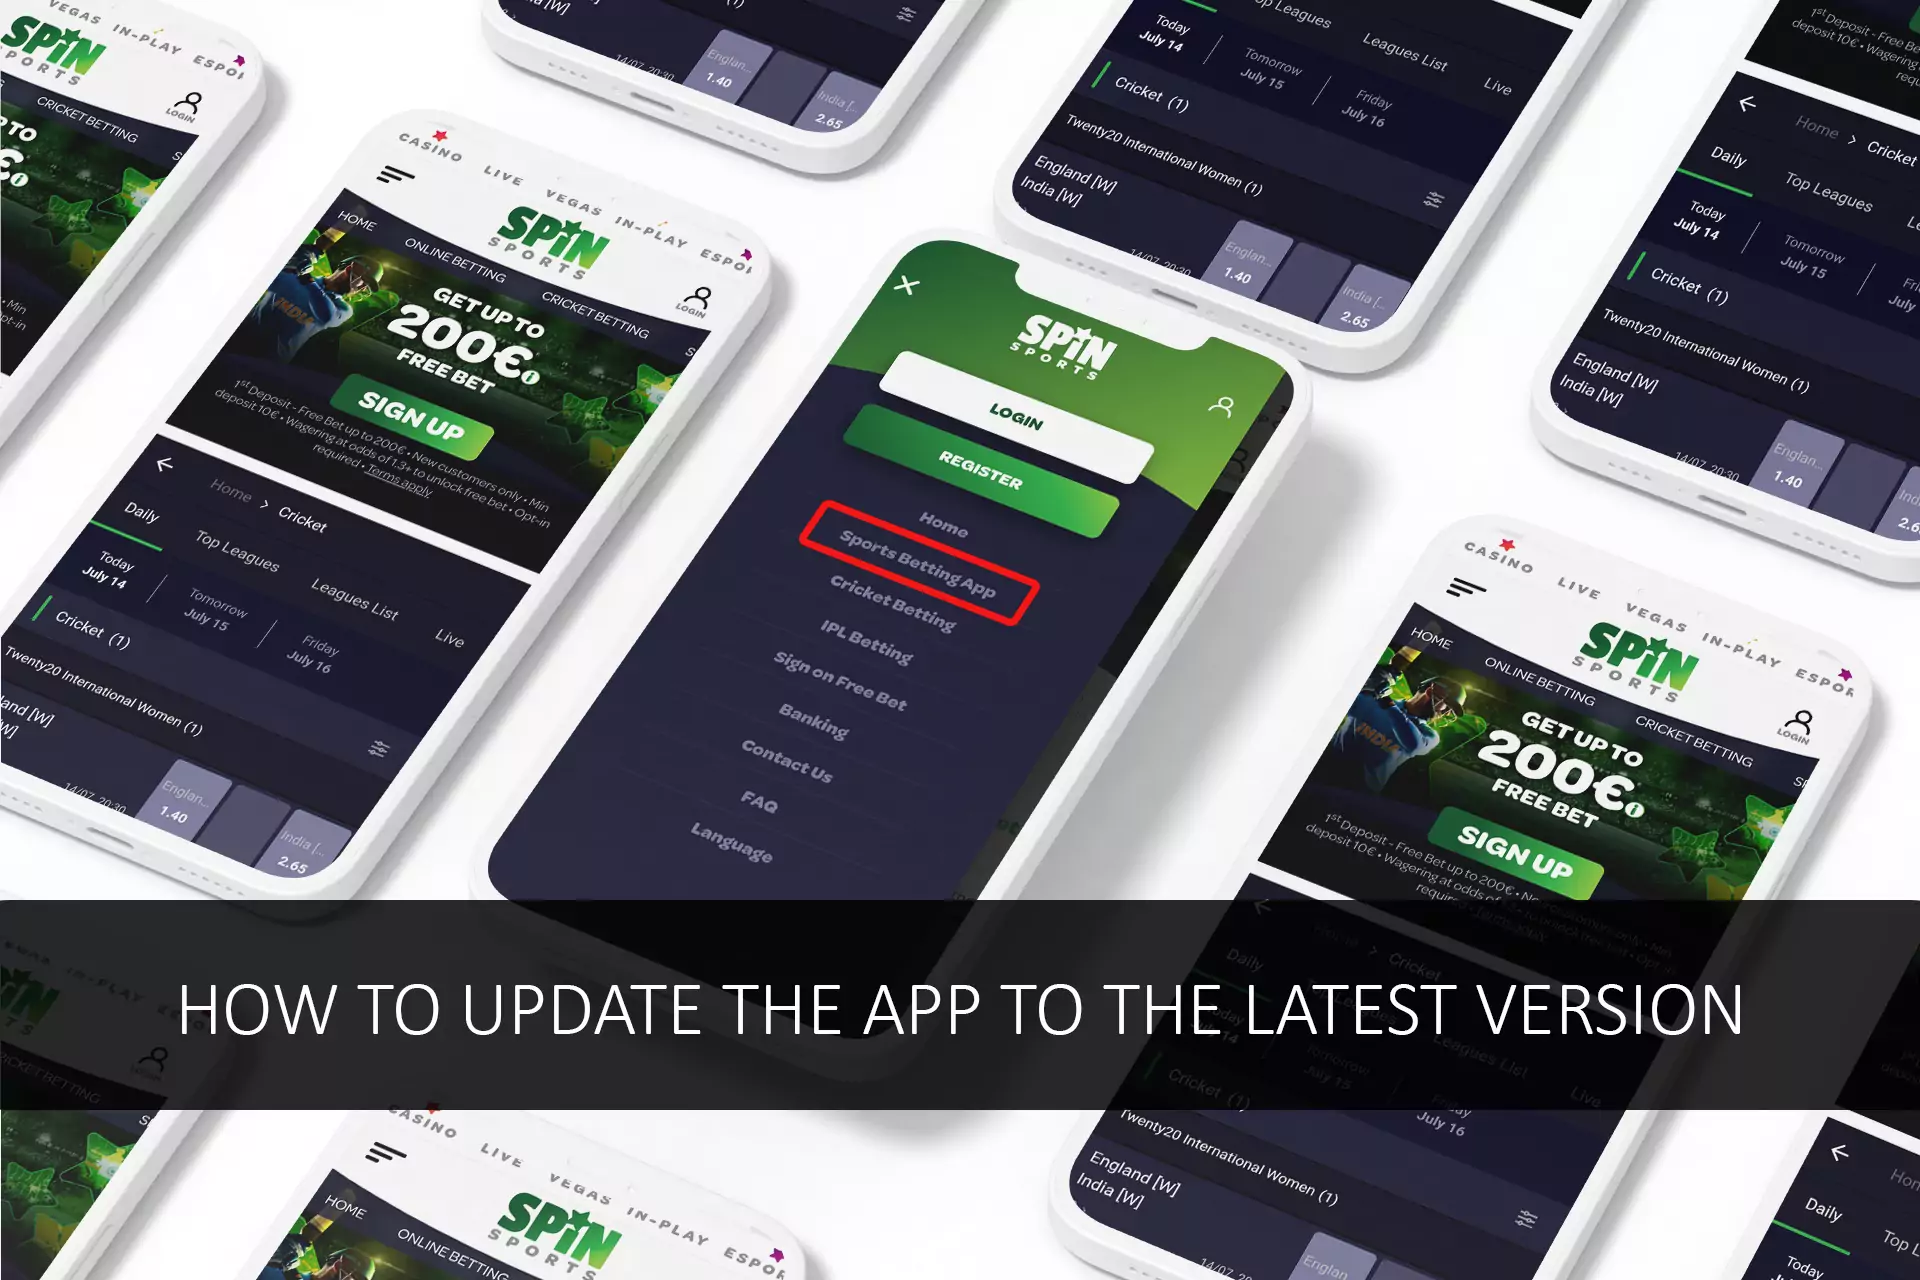 Updation of the app starts automatically after the last versions come available.